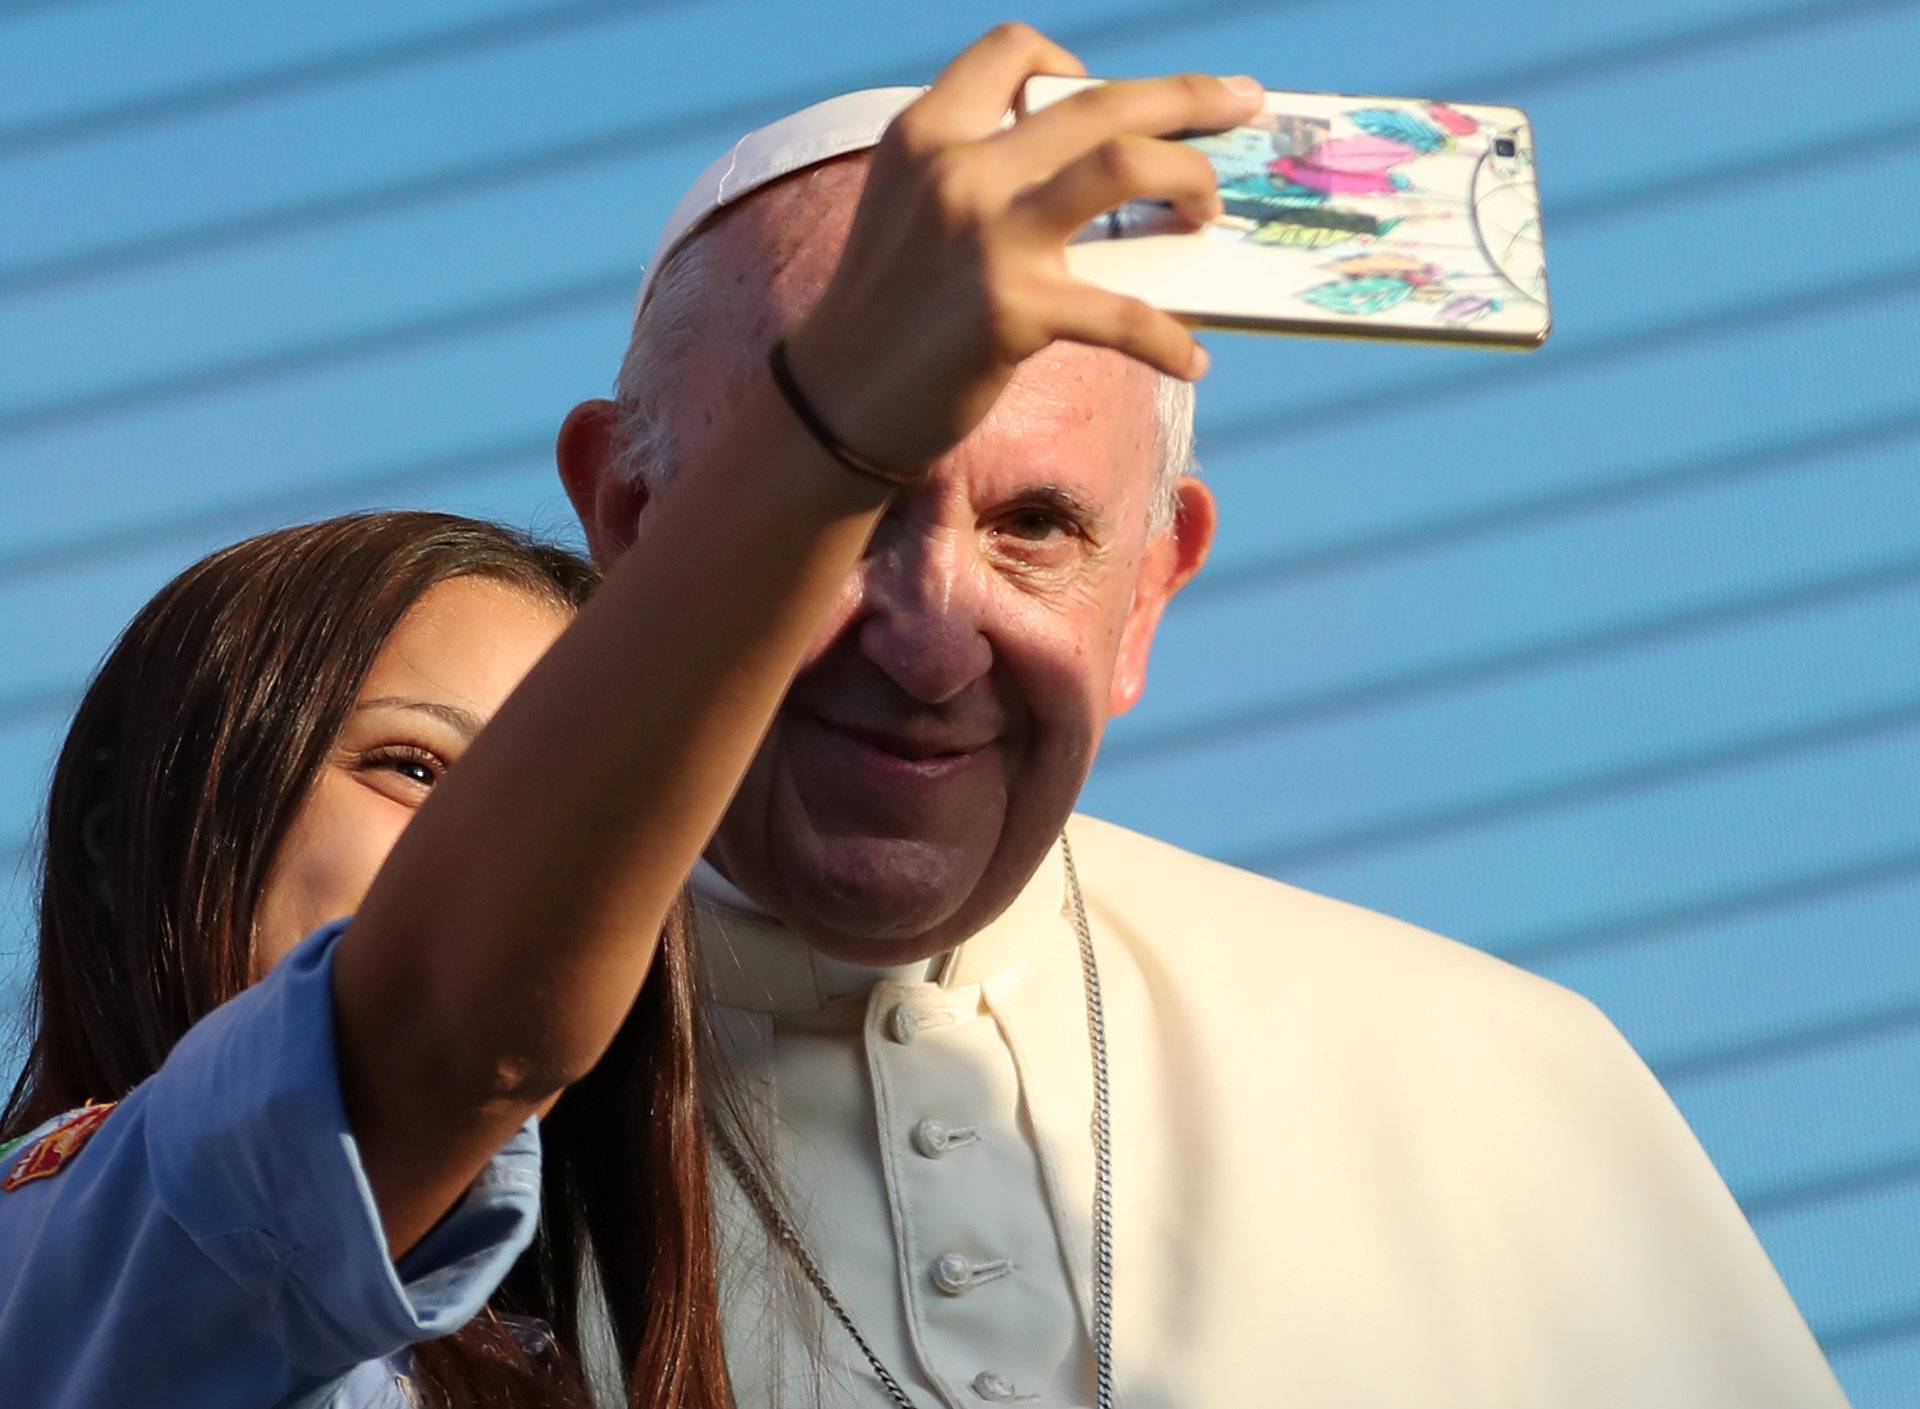 Pope Francis takes a selfie with a faithful as he meets with young people at the Politeama square in Palermo